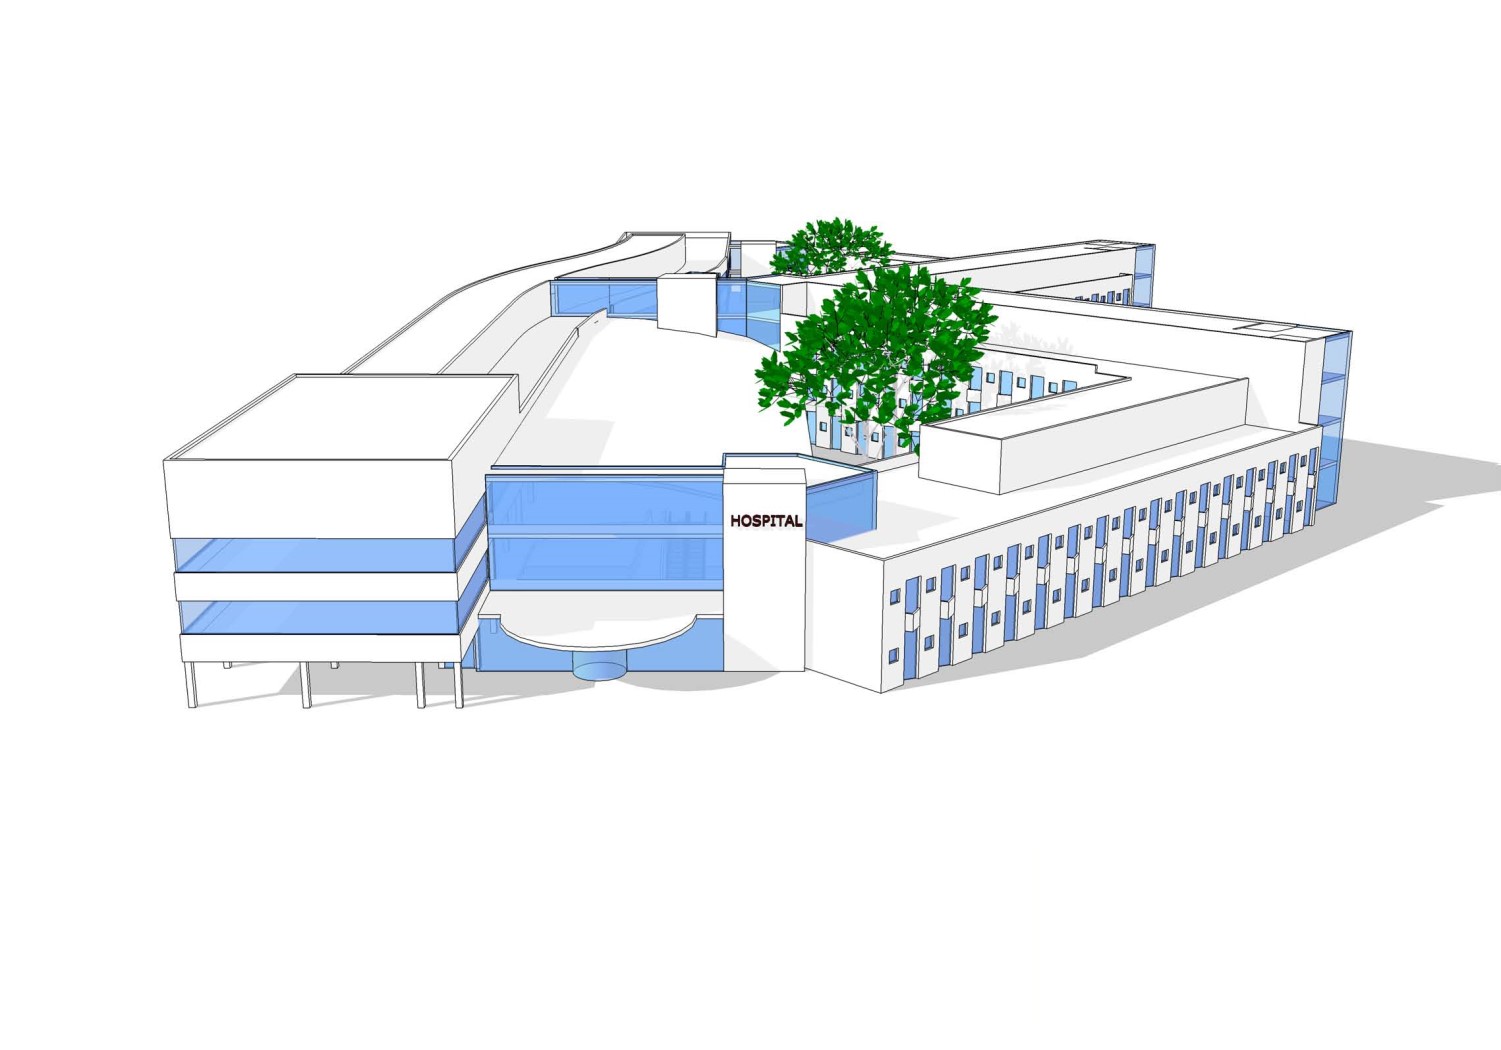 18 Example of a 200 bed hospital, contemplated with the modular design principle